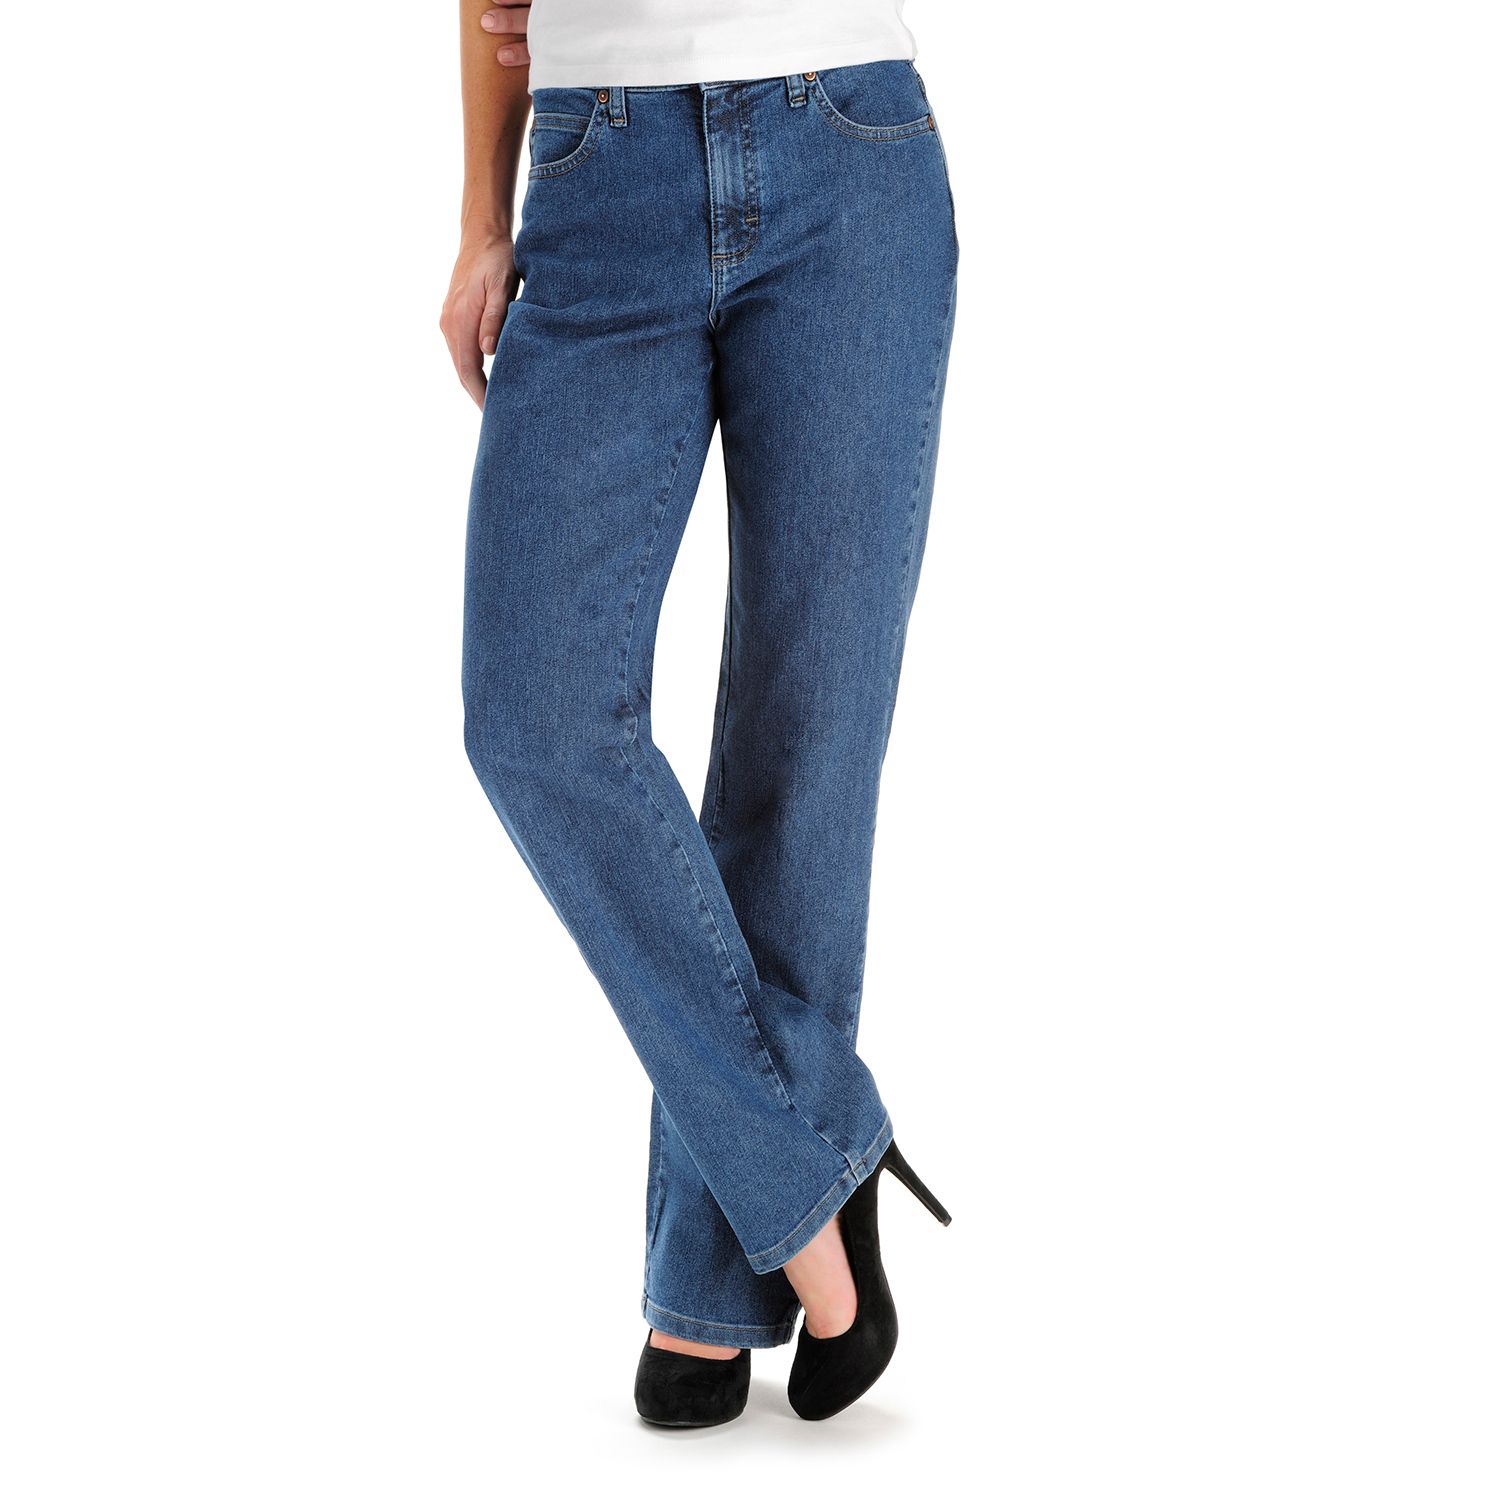 lee relaxed fit at the waist jeans petite